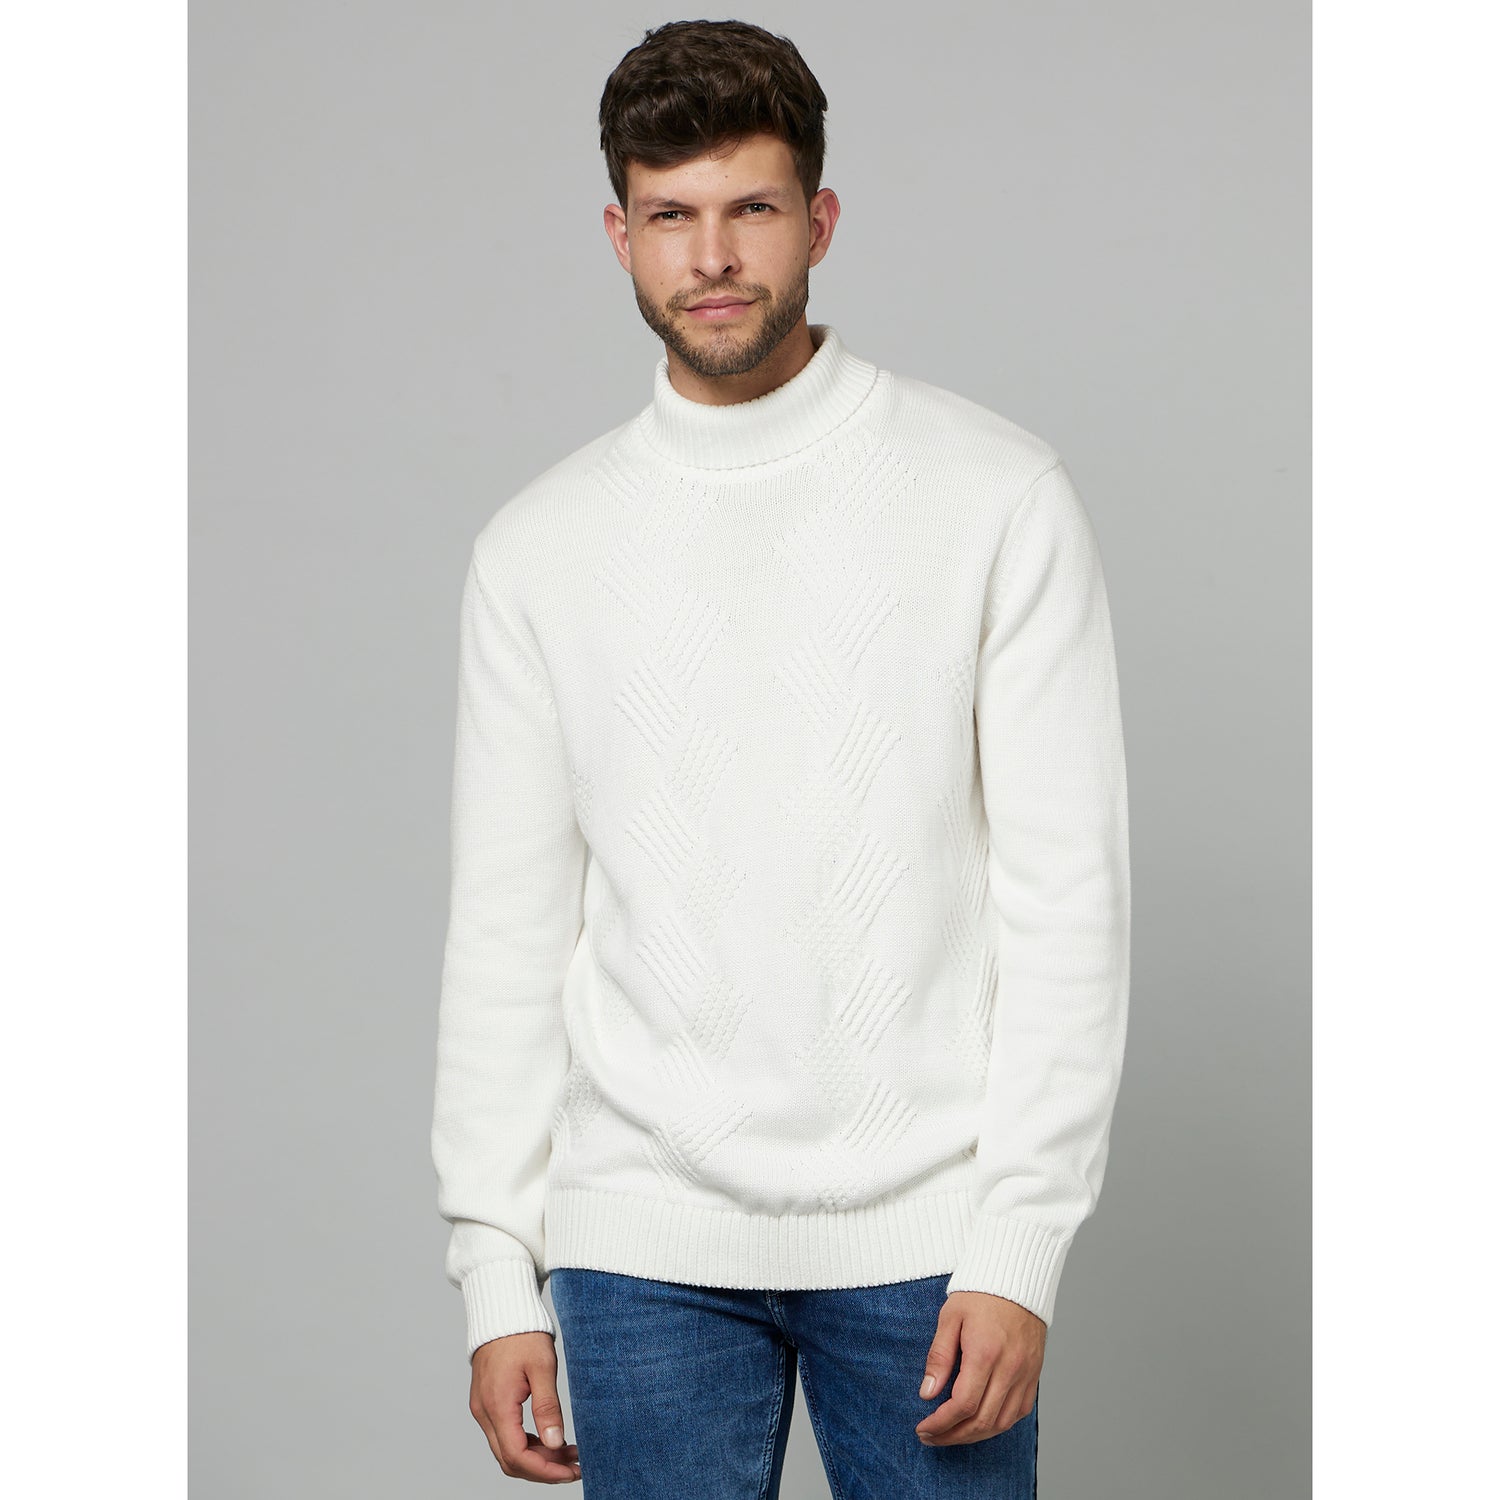 Off White Quirky Self Design Long Sleeve Cotton Pullover Sweater (FETEXTURE)